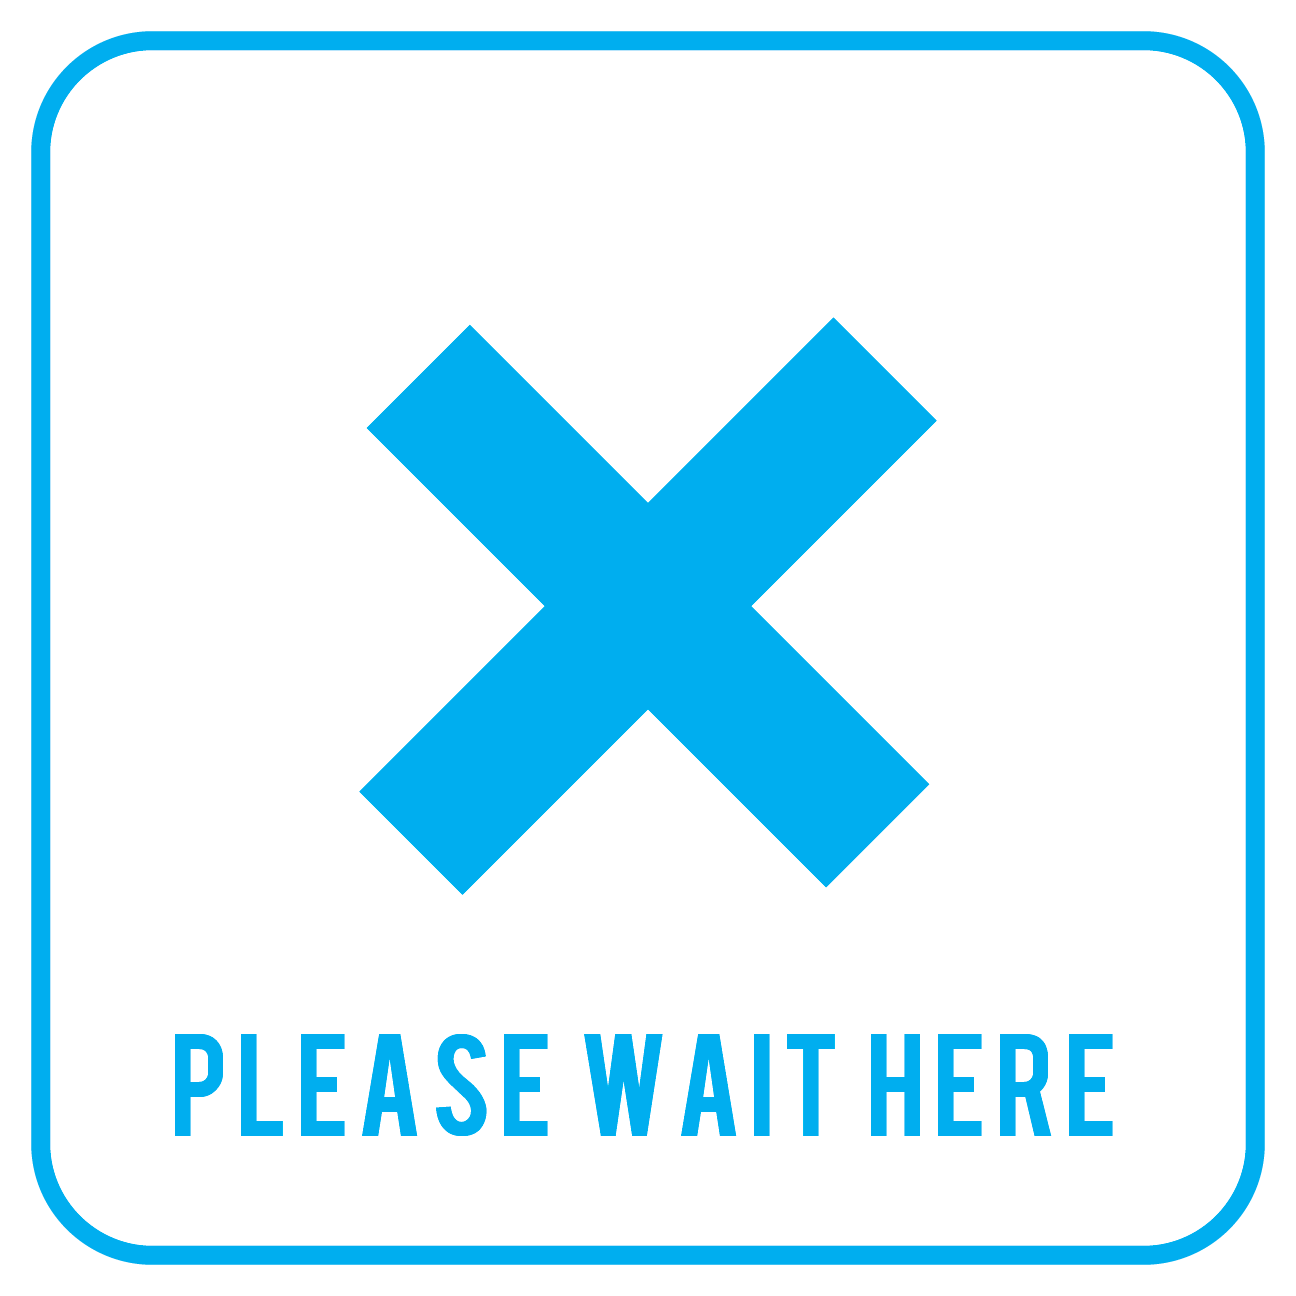 Social Distancing - Please Wait Here - Floor Sign - CYANvisuals